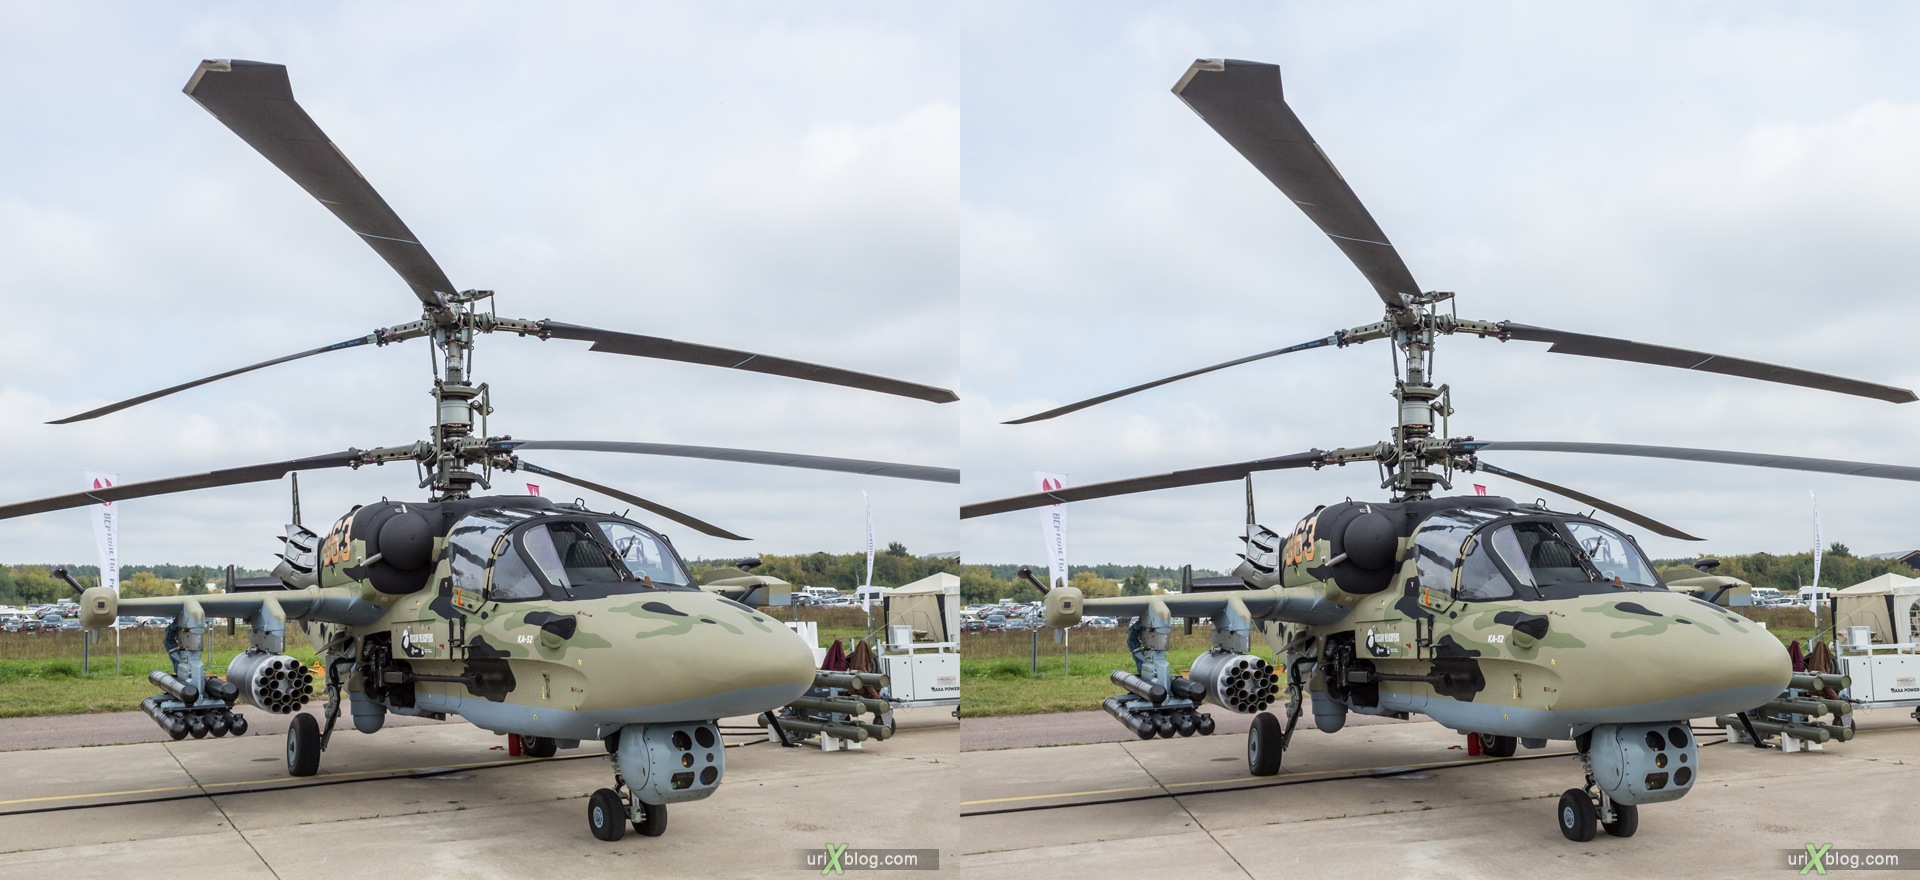 2013, MAKS, International Aviation and Space Salon, Russia, Ramenskoye airfield, Ka-52 Alligator, helicopter, 3D, stereo pair, cross-eyed, crossview, cross view stereo pair, stereoscopic